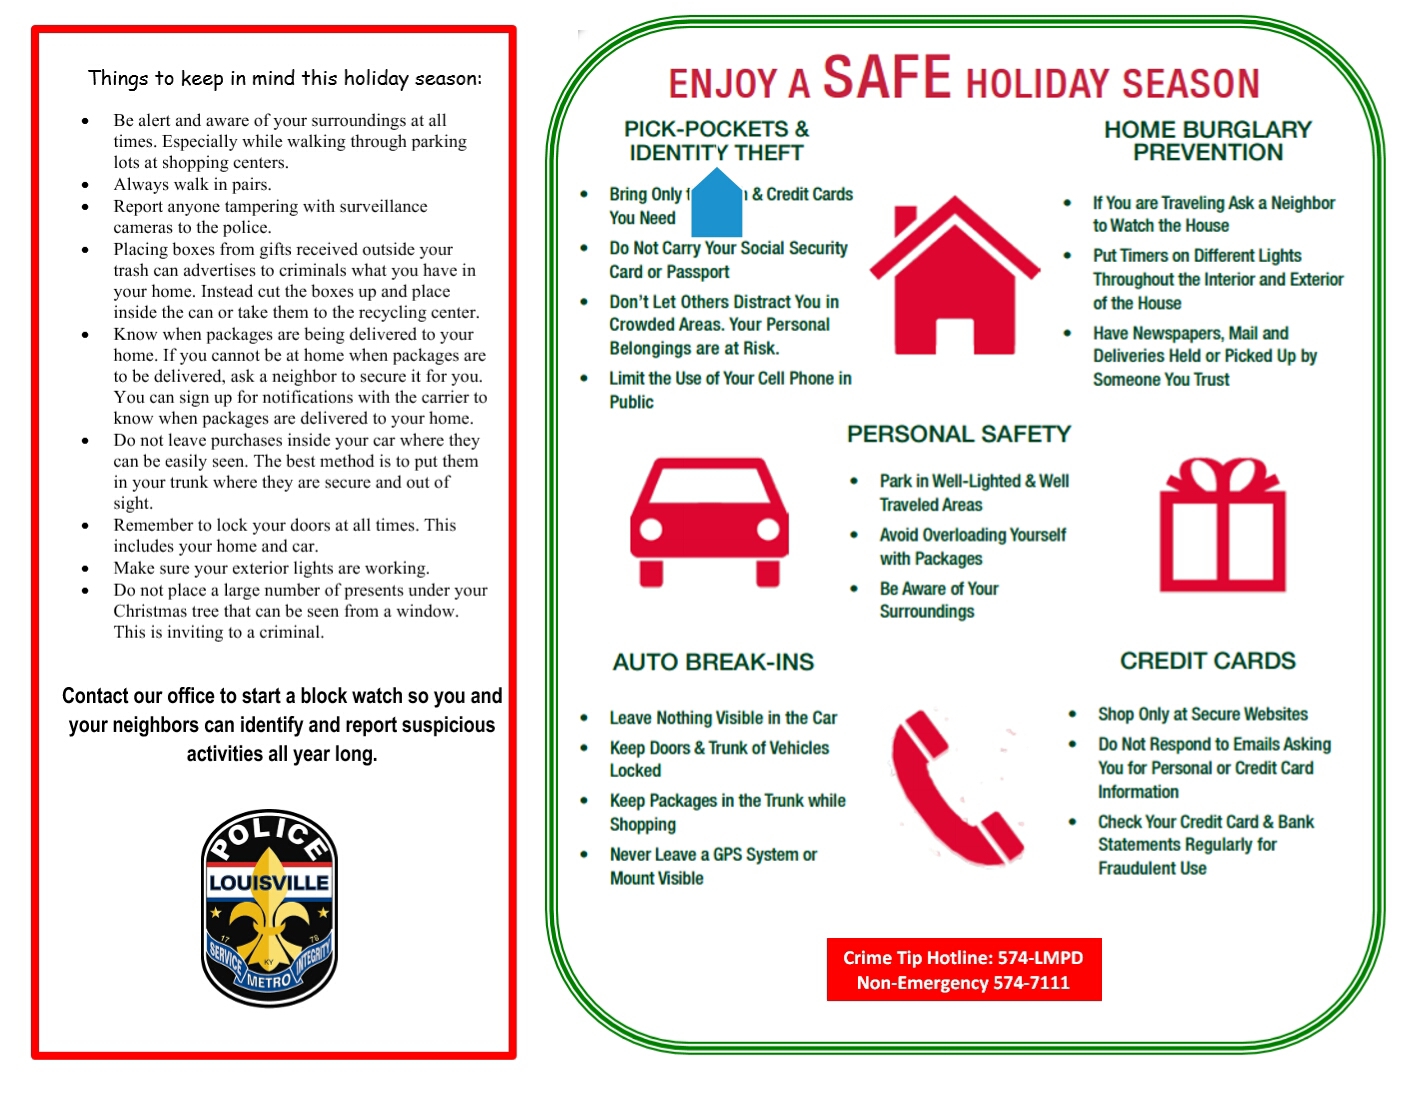 Holiday safety